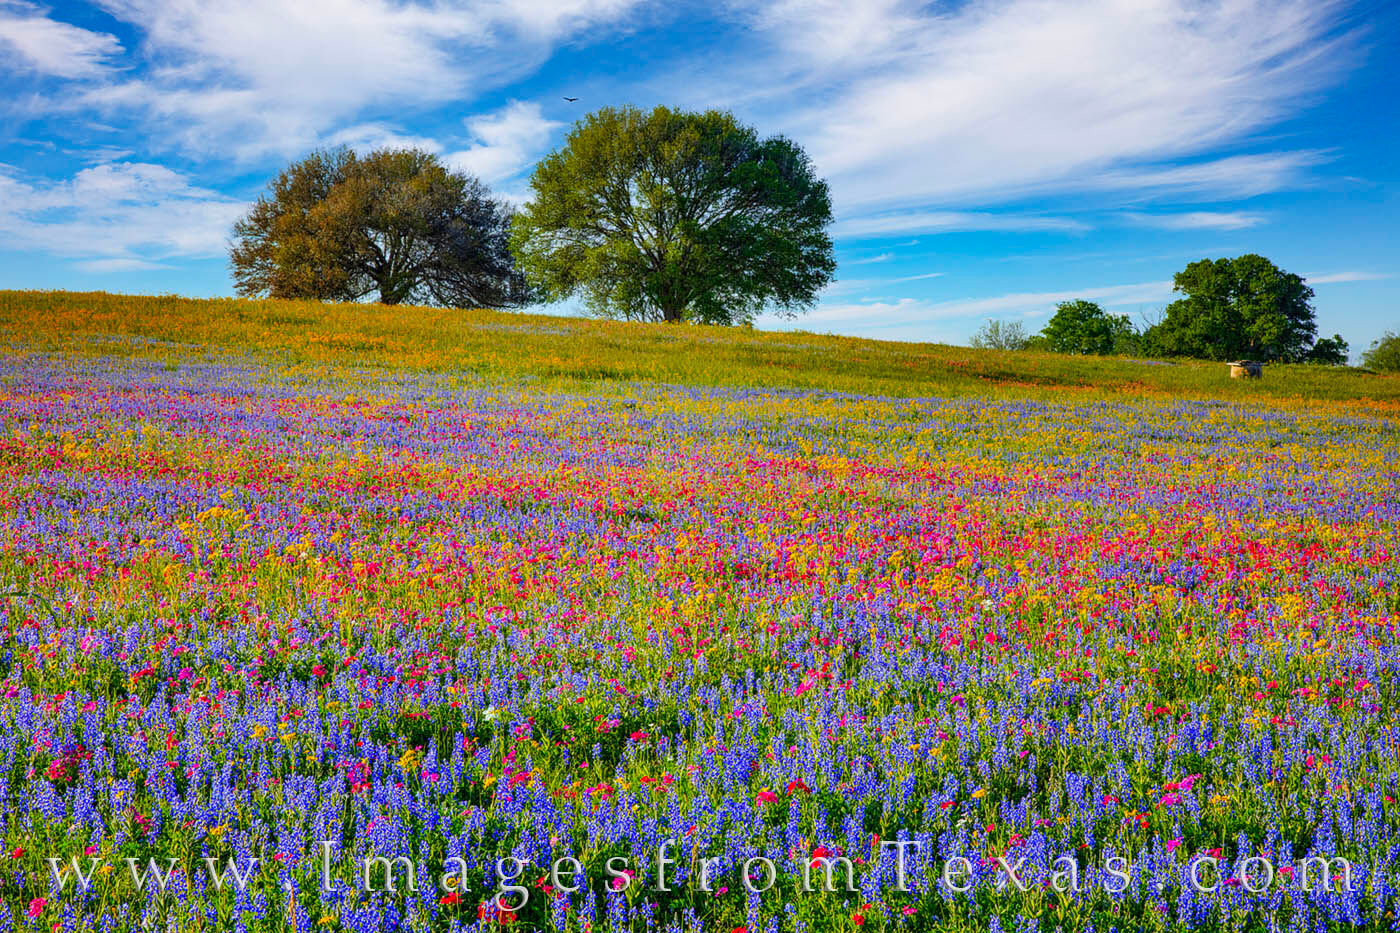 A field of blue, red, and gold wildflowers brighten up a cool spring day in Washington County about an hour east of Austin.